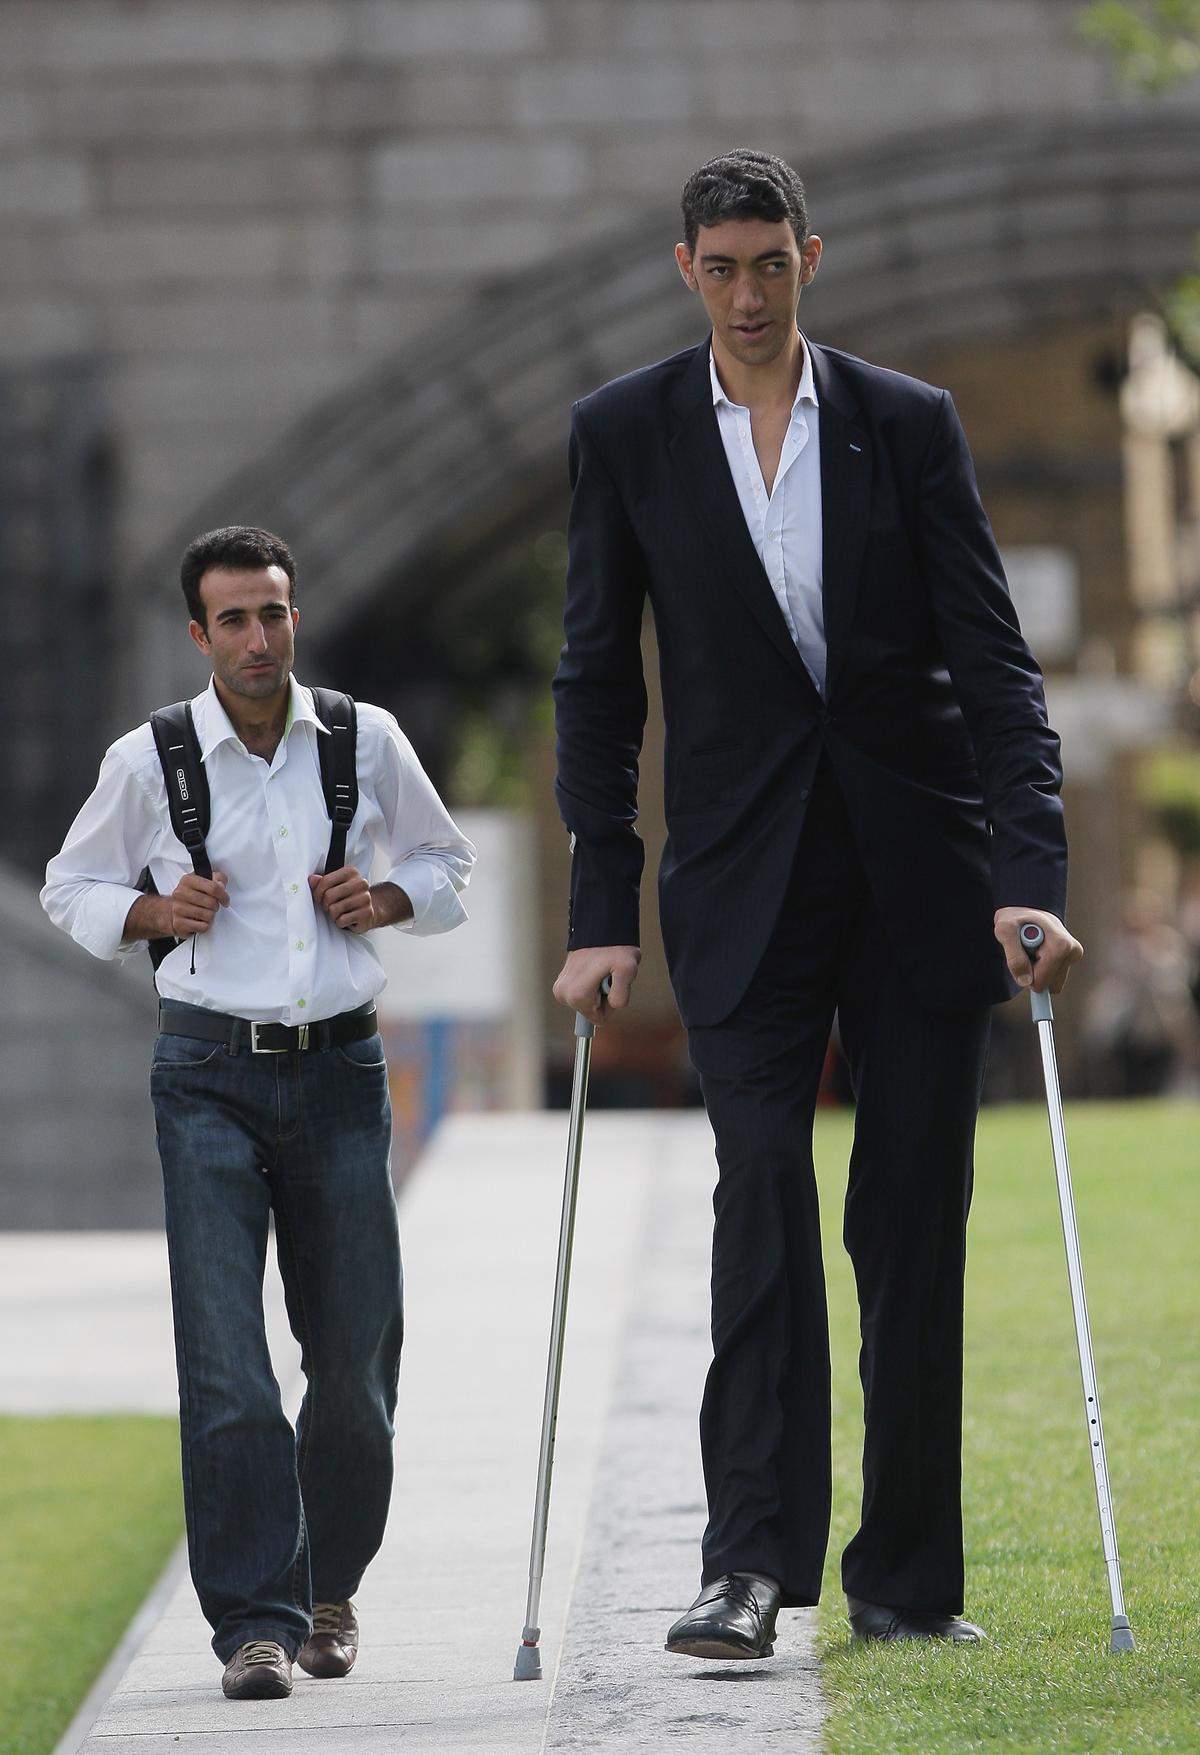 The Tallest Man Living, Sultan Kosen of Turkey poses with his brother Hasan Kosen in front of Tower Bridge, London. (Dan Kitwood/Getty Images)